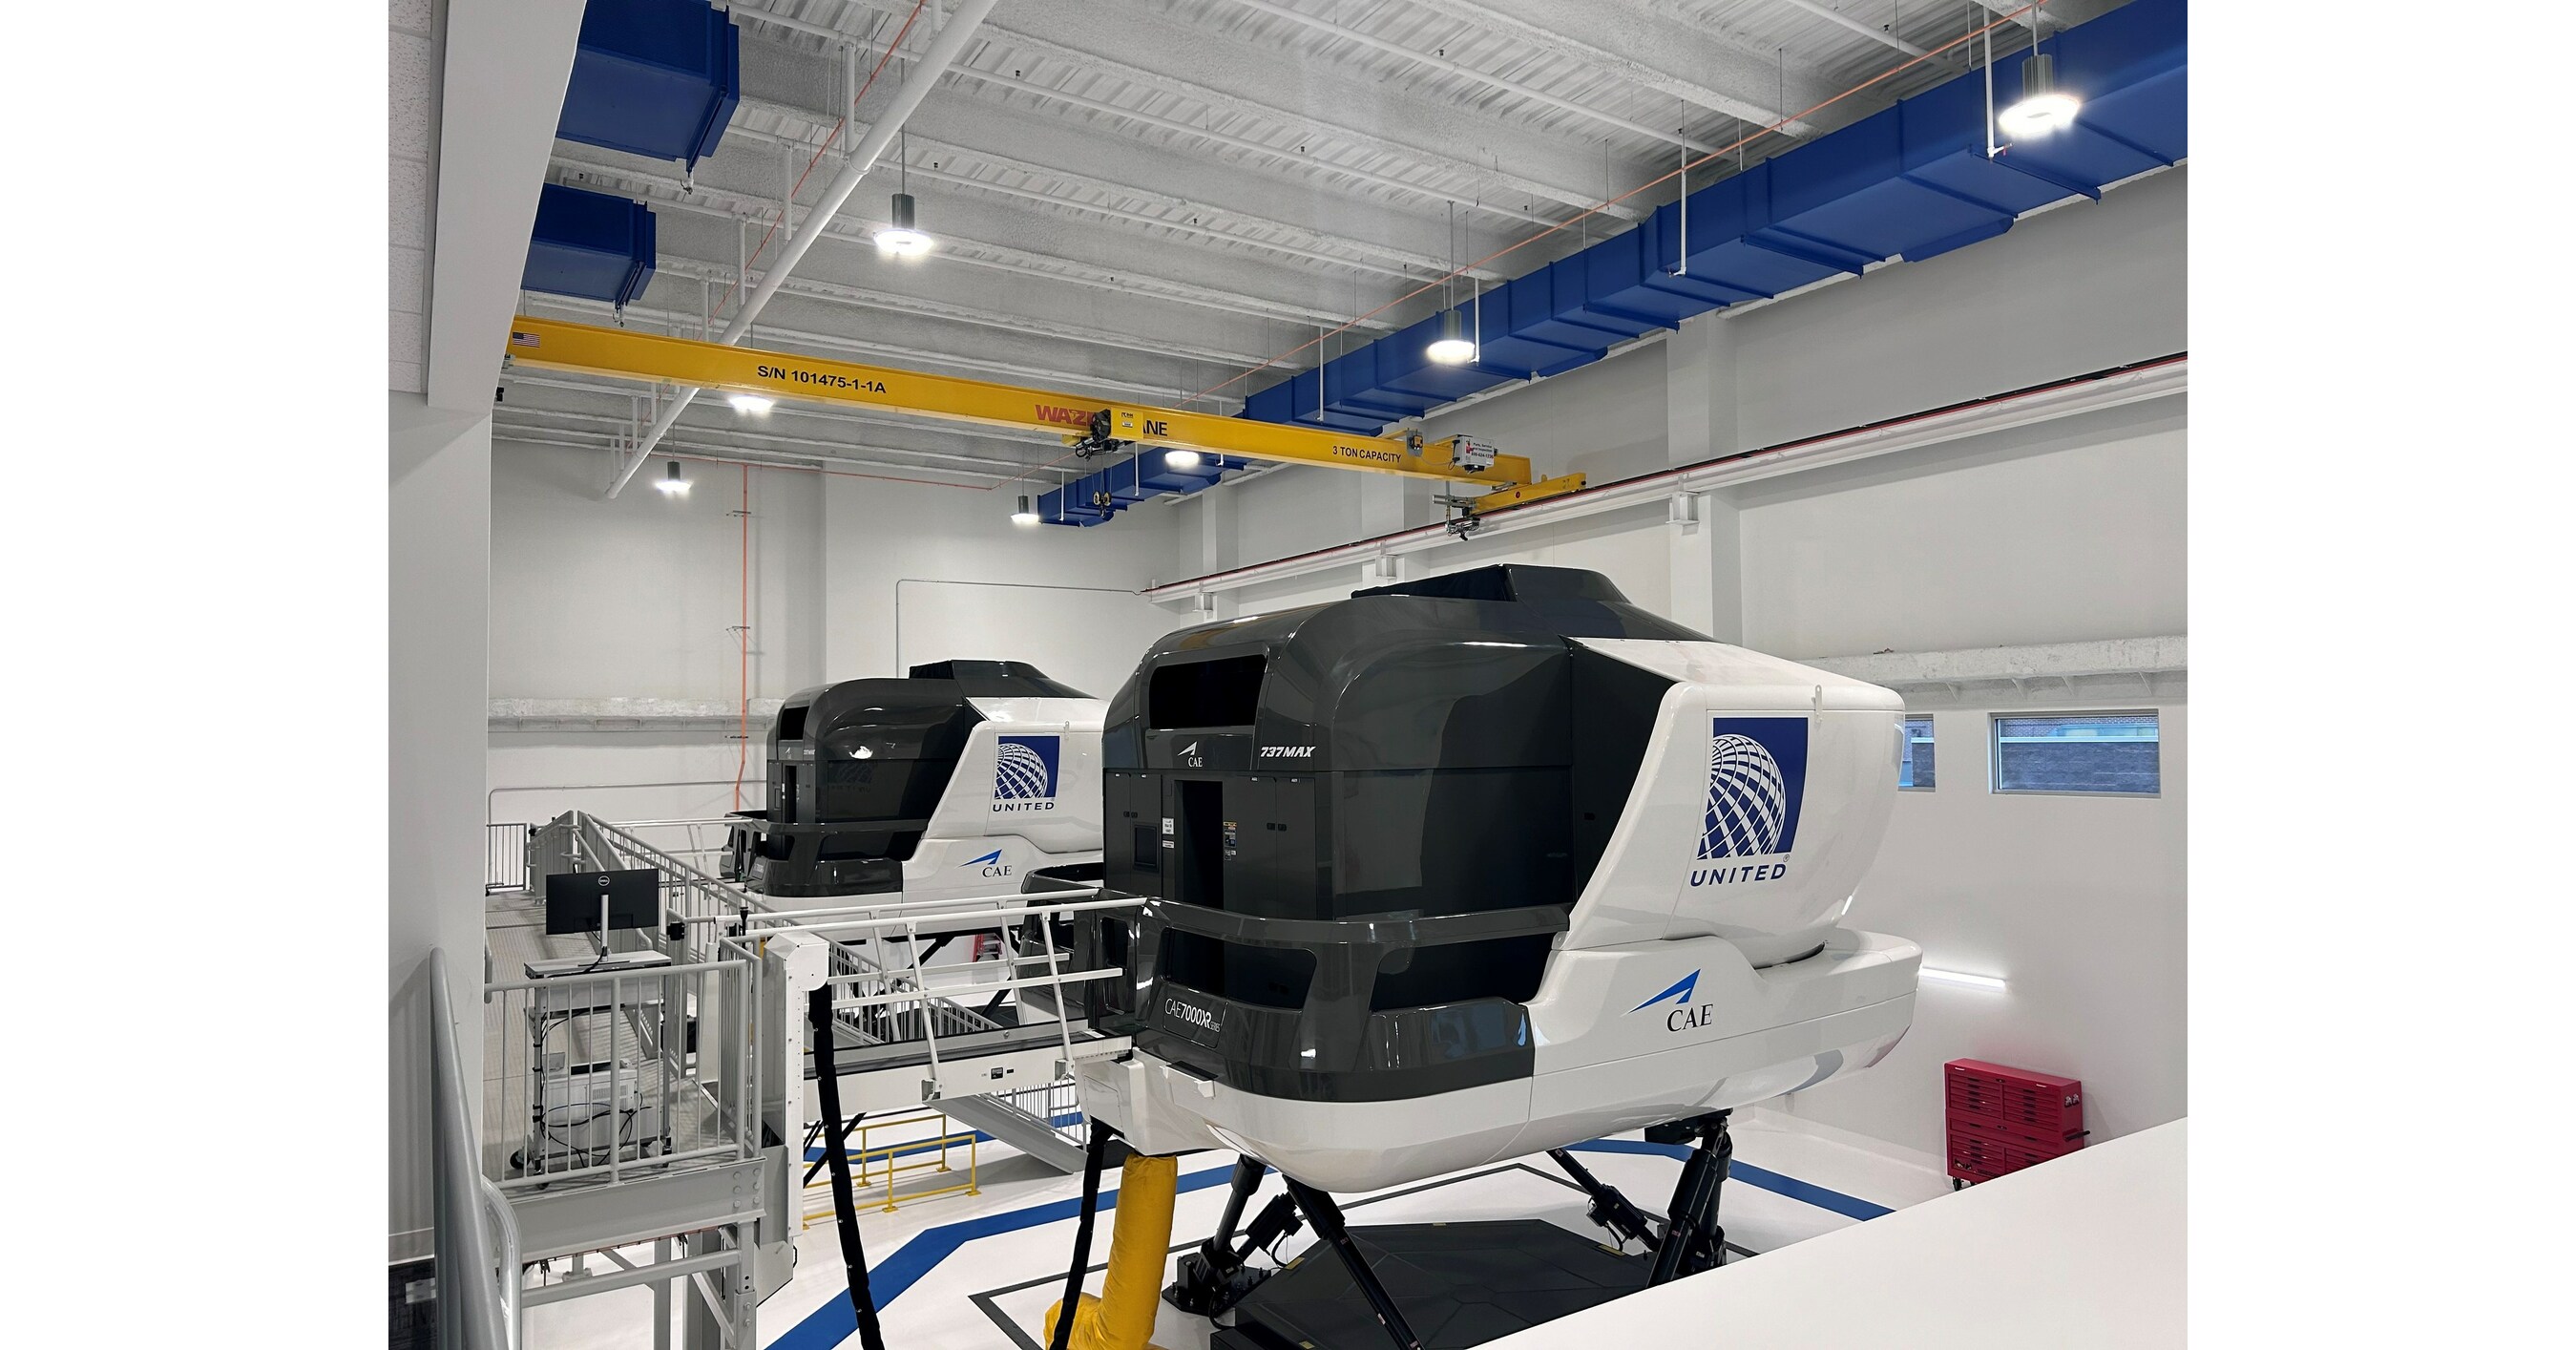 United Expands World's Largest Flight Training Center with Huge, New  Building and Room for 12 New Flight Simulators